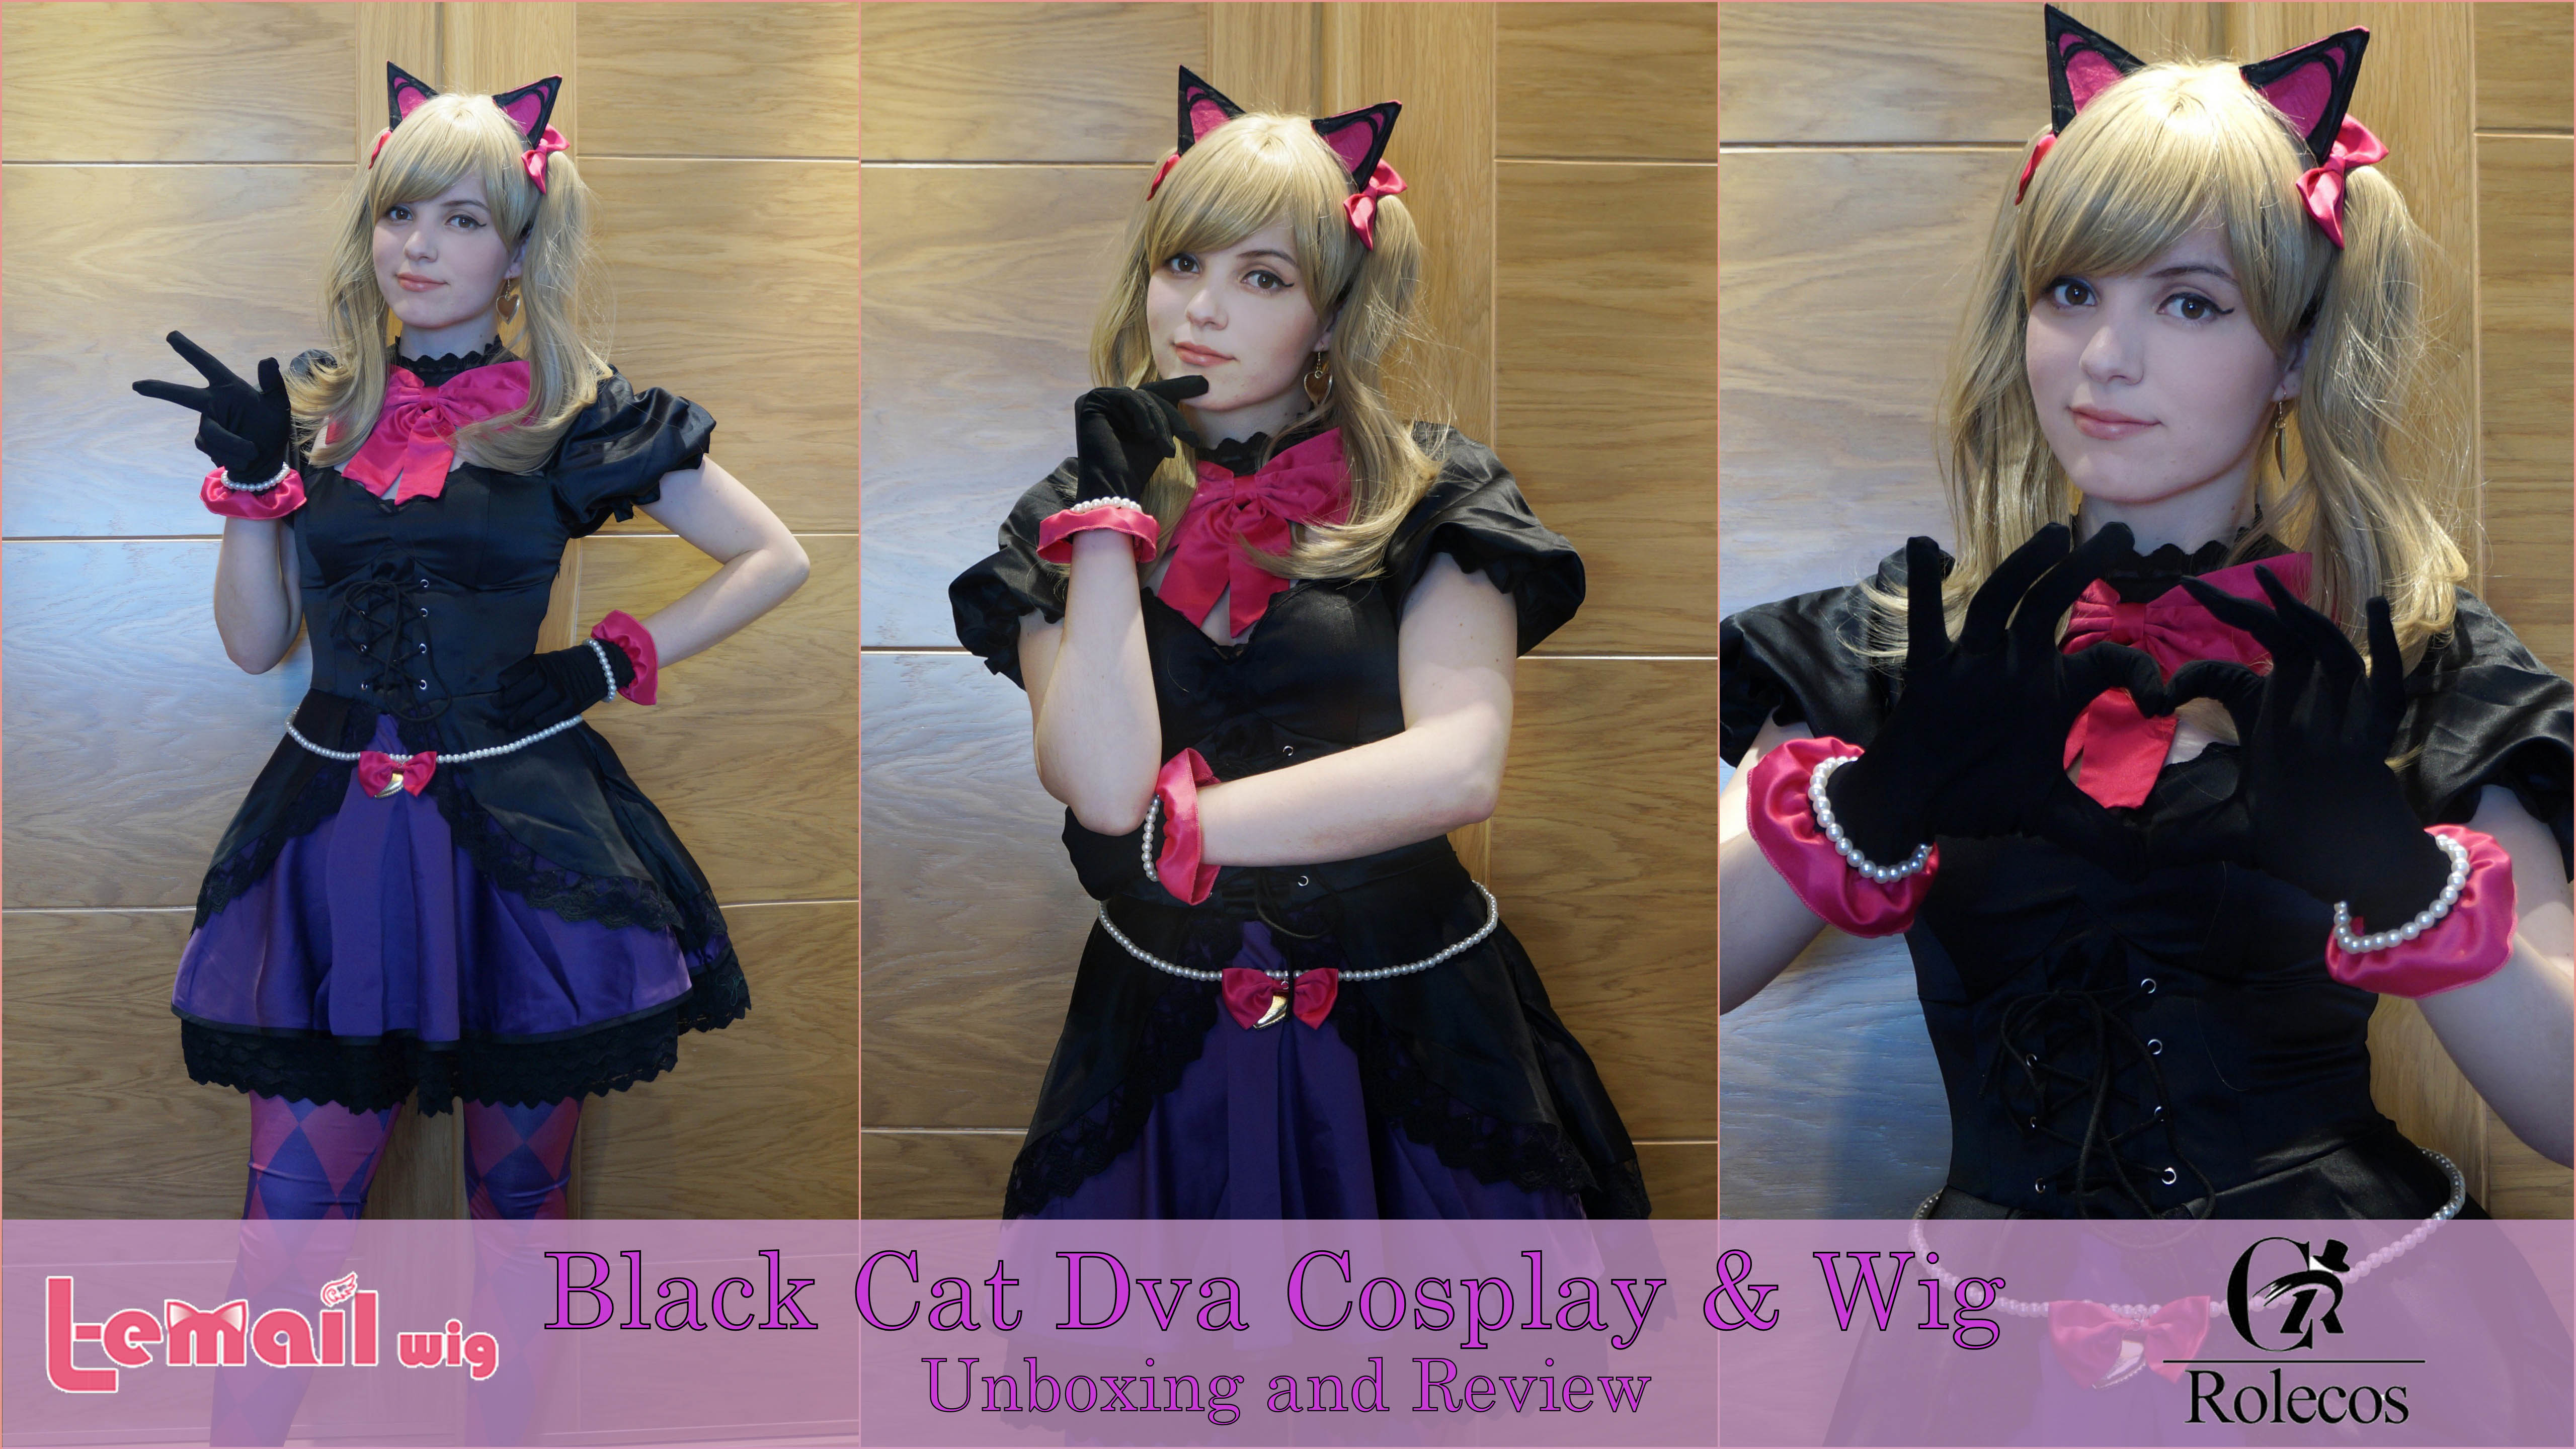 Black Cat Dva Wig & Cosplay review from L-email and Rolecosplay